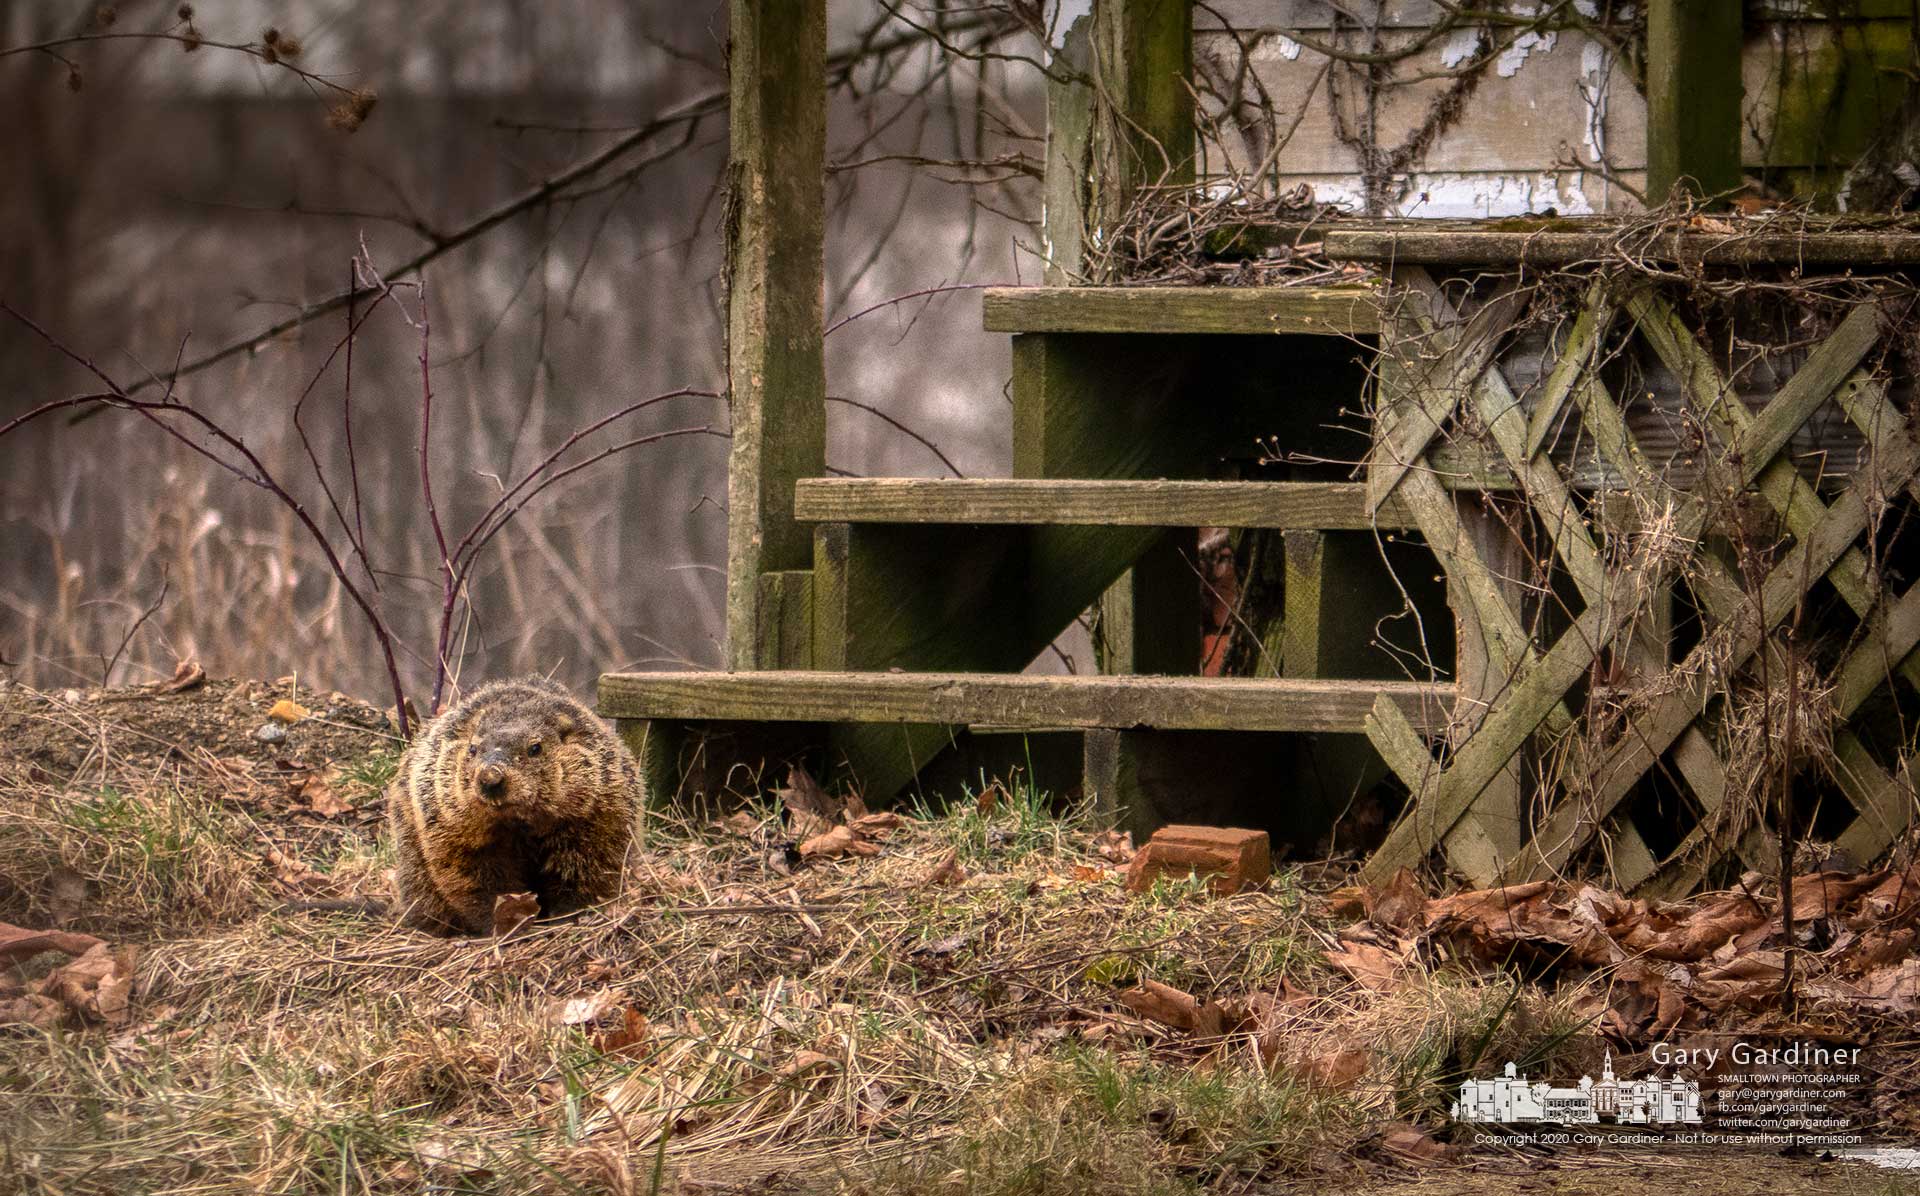 A groundhog investigates a visitor before returning to its den beneath the steps of the old farmhouse at the Braun Farm property on Cleveland Ave. My Final Photo for Feb. 24, 2020.